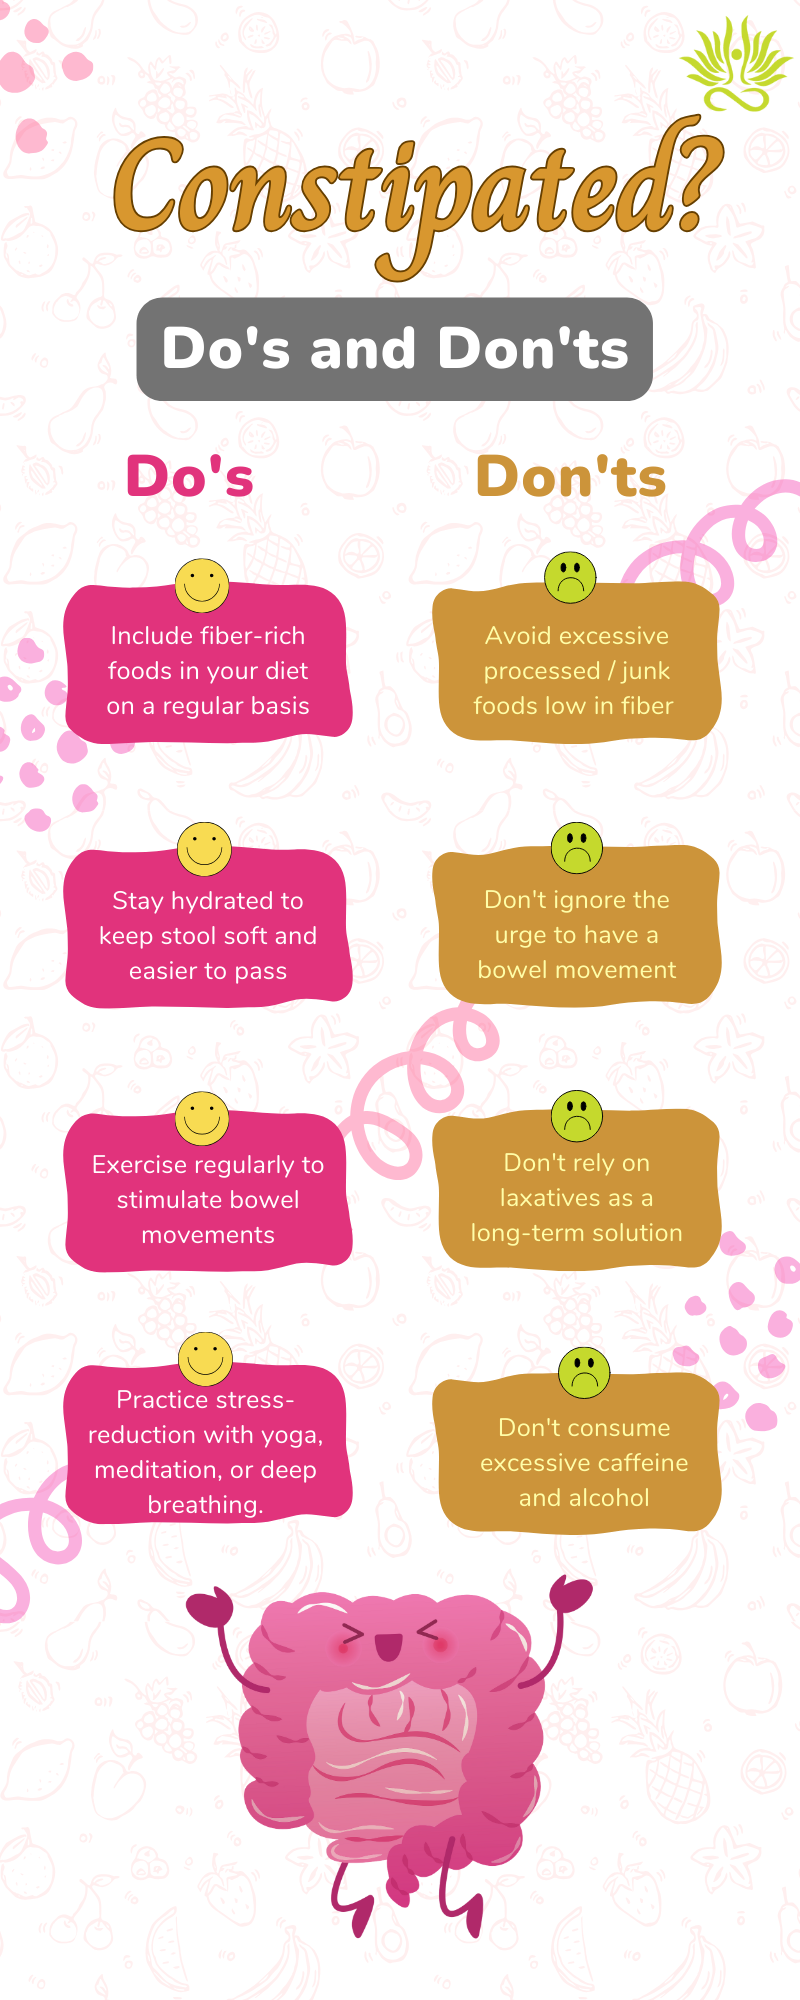 Do's and Don'ts for Constipation